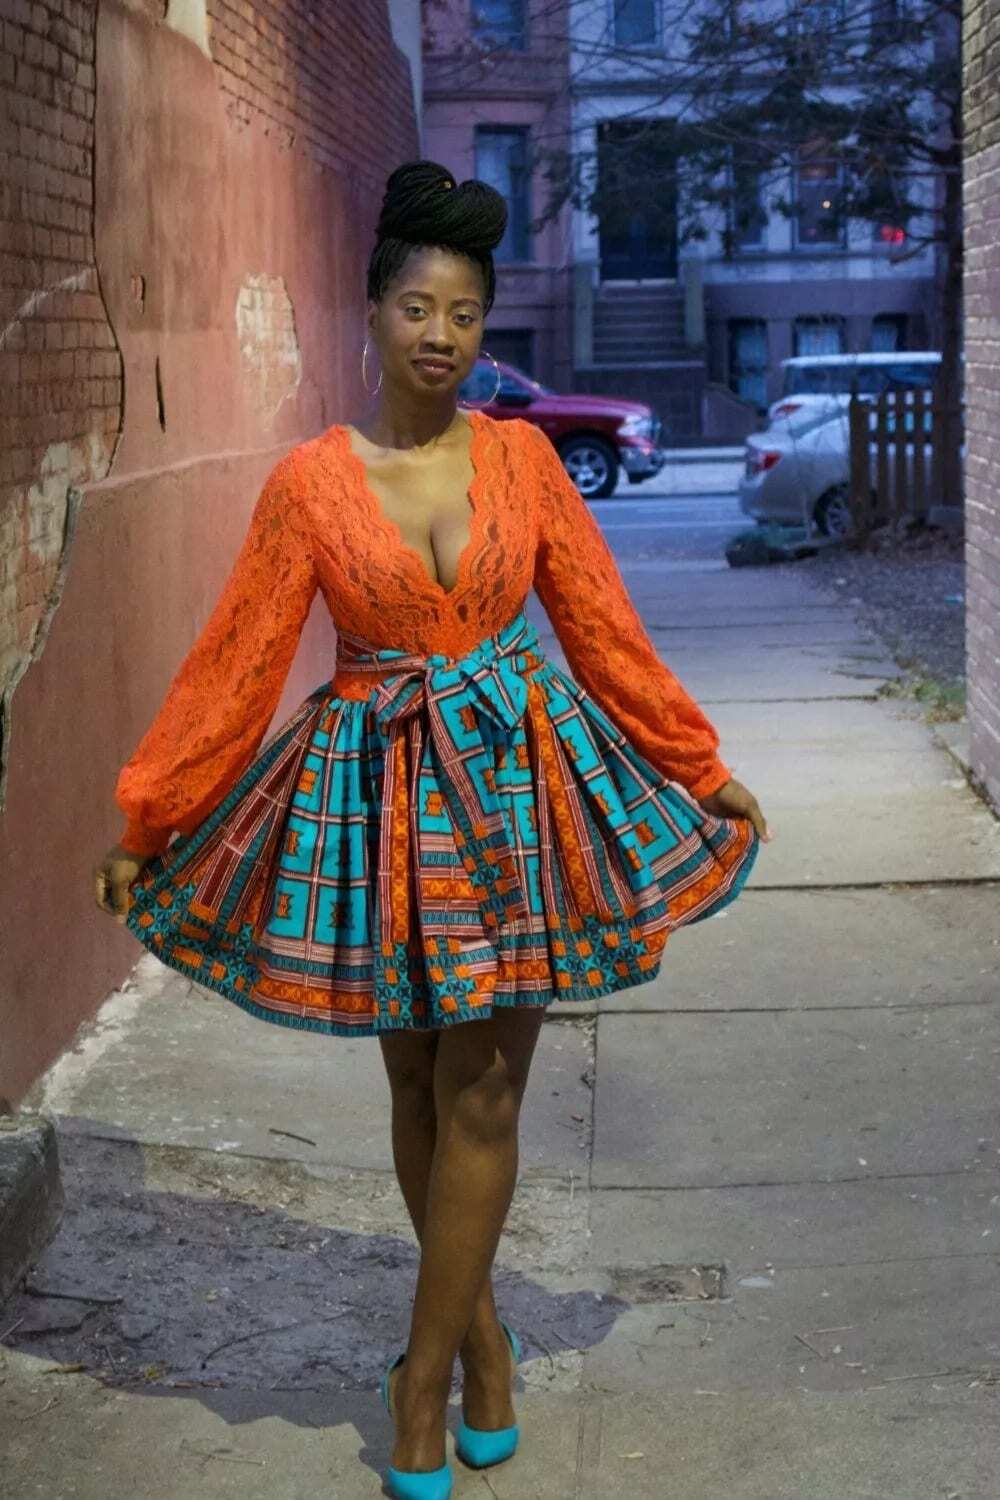 african print dresses with lace
african attire with lace
african lace short dresses